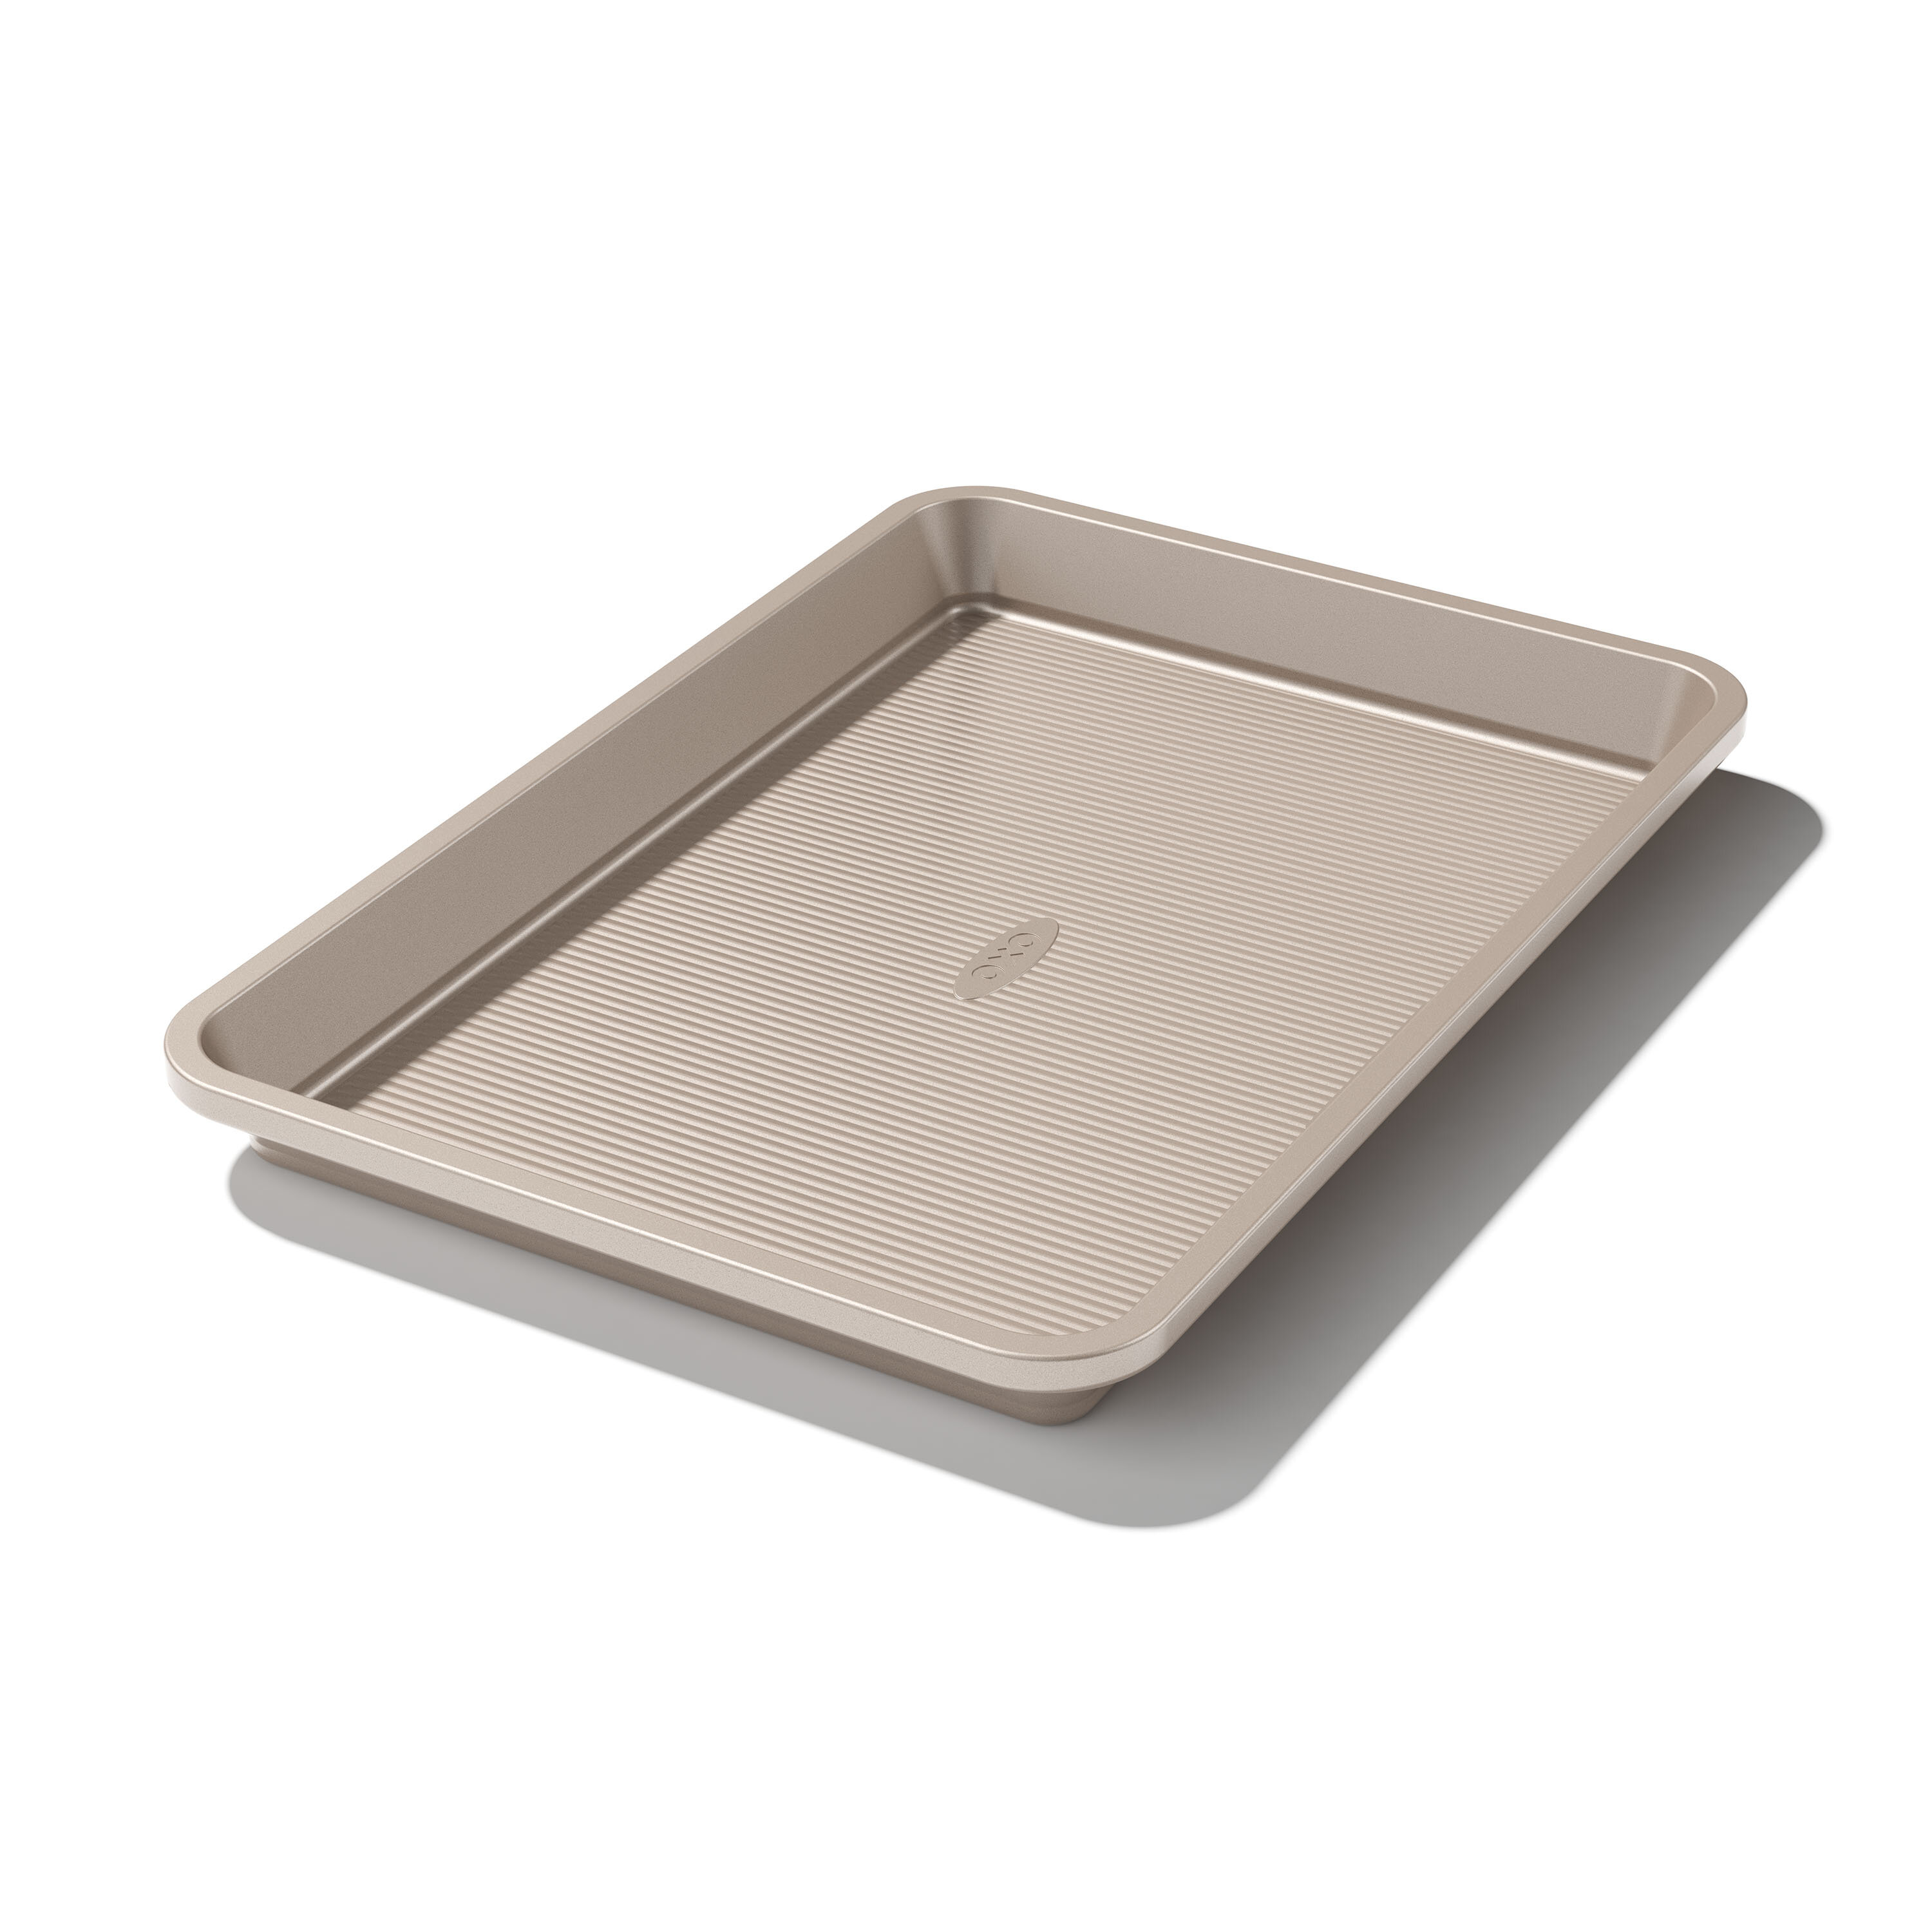 All-Clad Pro-Release Jelly Roll Pan